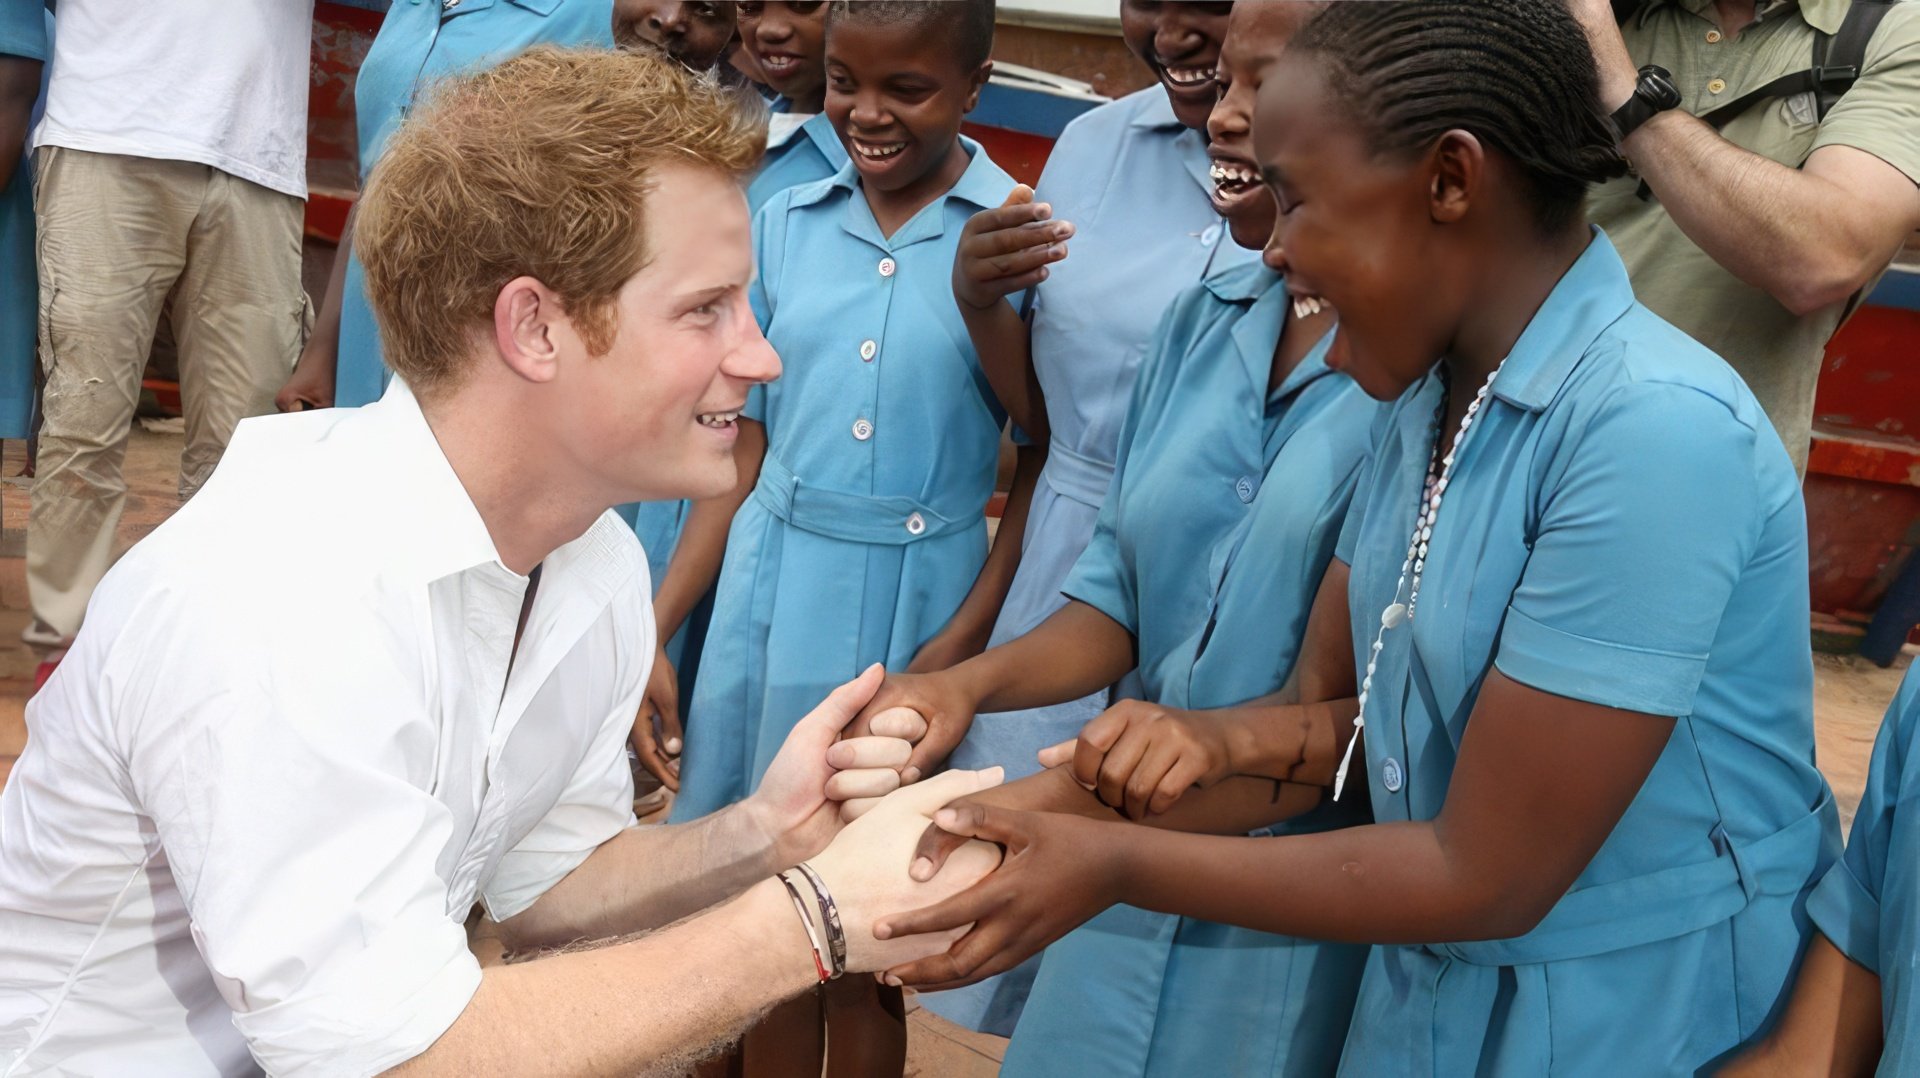 Prince Harry launched a charity – Sentebale